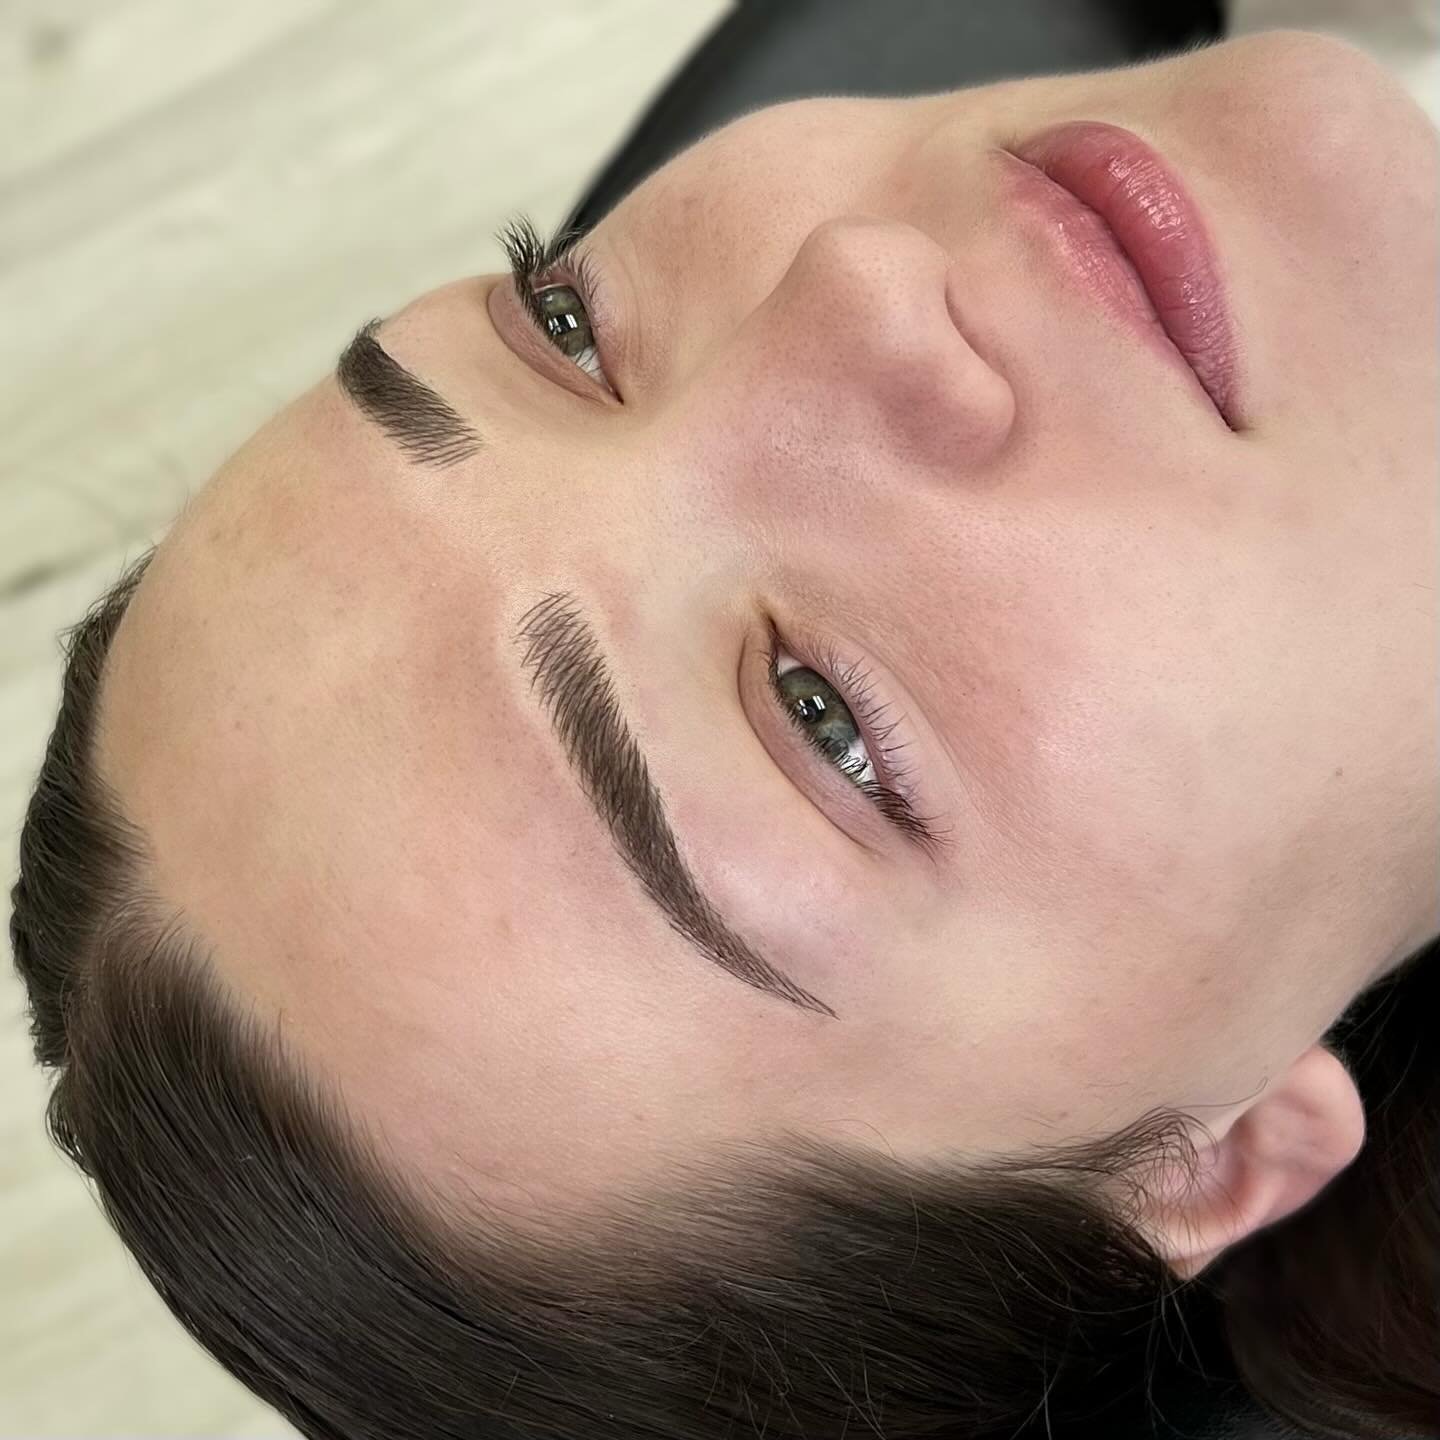 Long beautiful microbladed brows for this wonderful gal✨
We ended up using a tiny bit of powder to help build up her tails where she has no natural hair. When you have missing sections of bare brows paired with really full/ dense brow sections microb